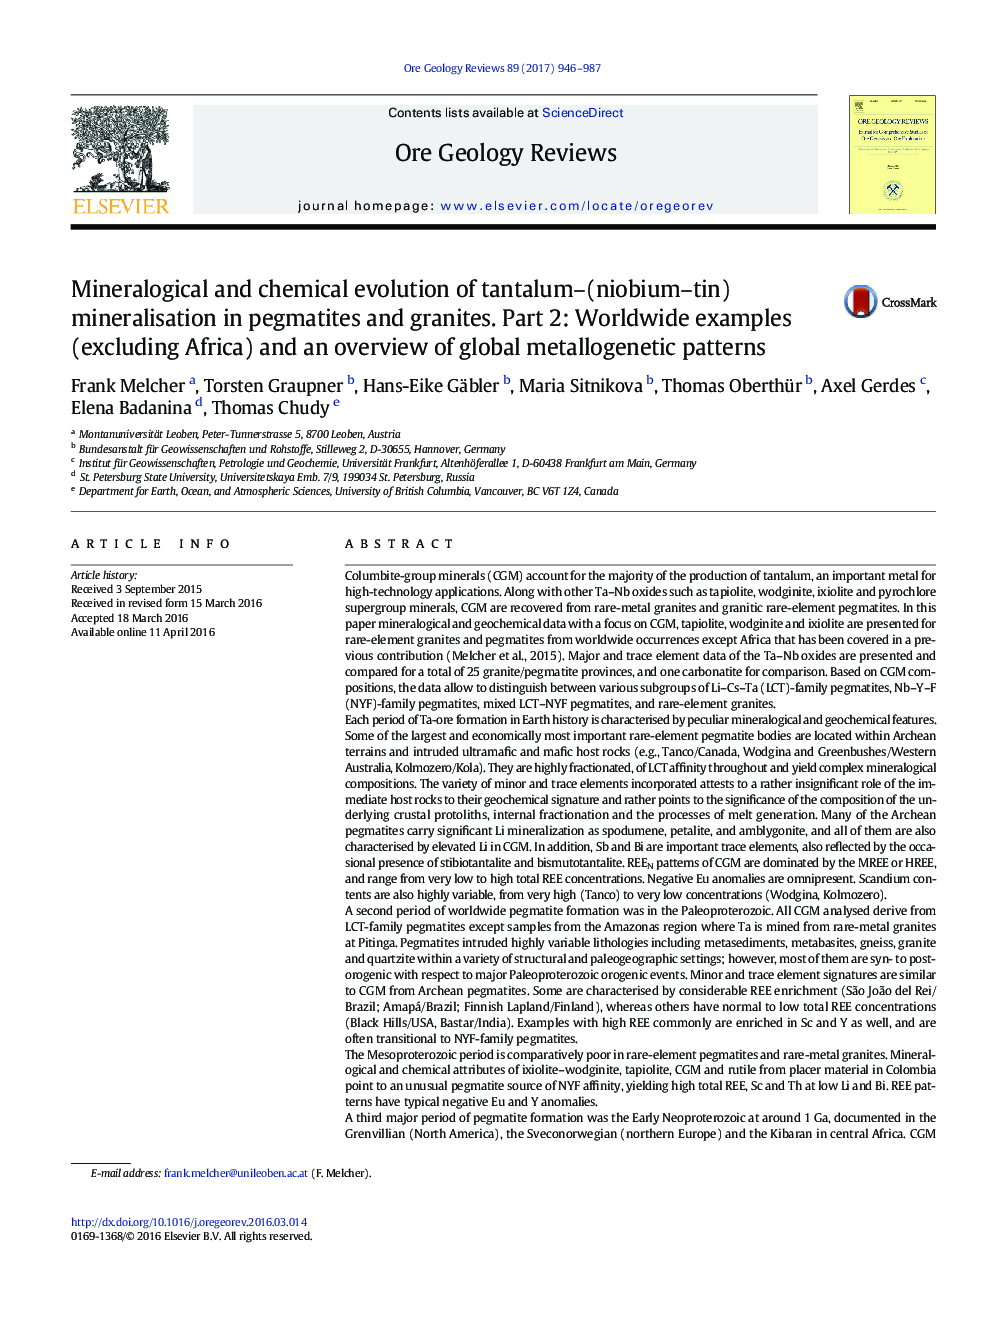 Mineralogical and chemical evolution of tantalum-(niobium-tin) mineralisation in pegmatites and granites. Part 2: Worldwide examples (excluding Africa) and an overview of global metallogenetic patterns